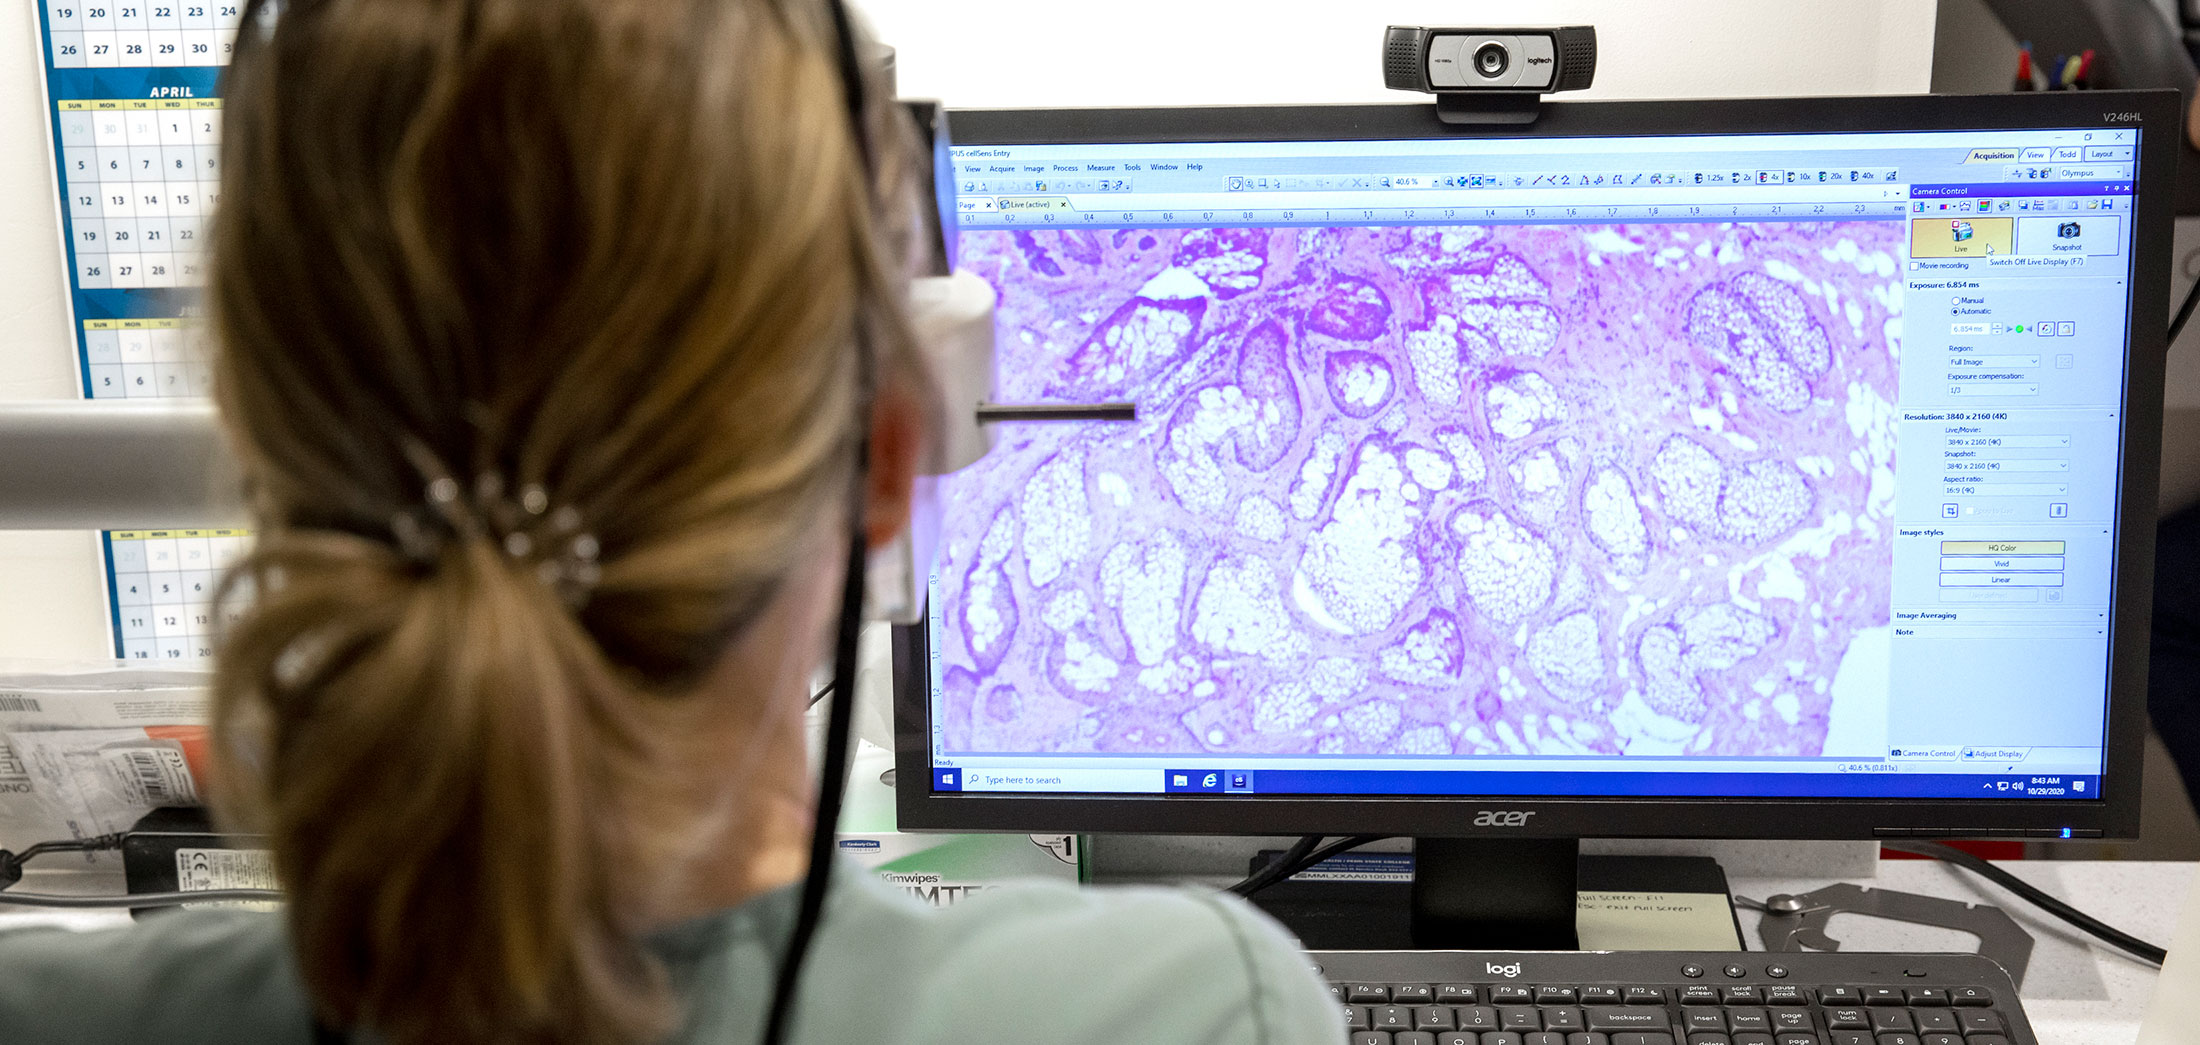 Ami Greene, a fellow in the Department of Dermatology, looks over skin samples using the Olympus digital imagers in the Mohs lab in October 2020. The back of her head is visible, with her hair in a ponytail, and a microscopic image is seen on a computer  screen next to her.